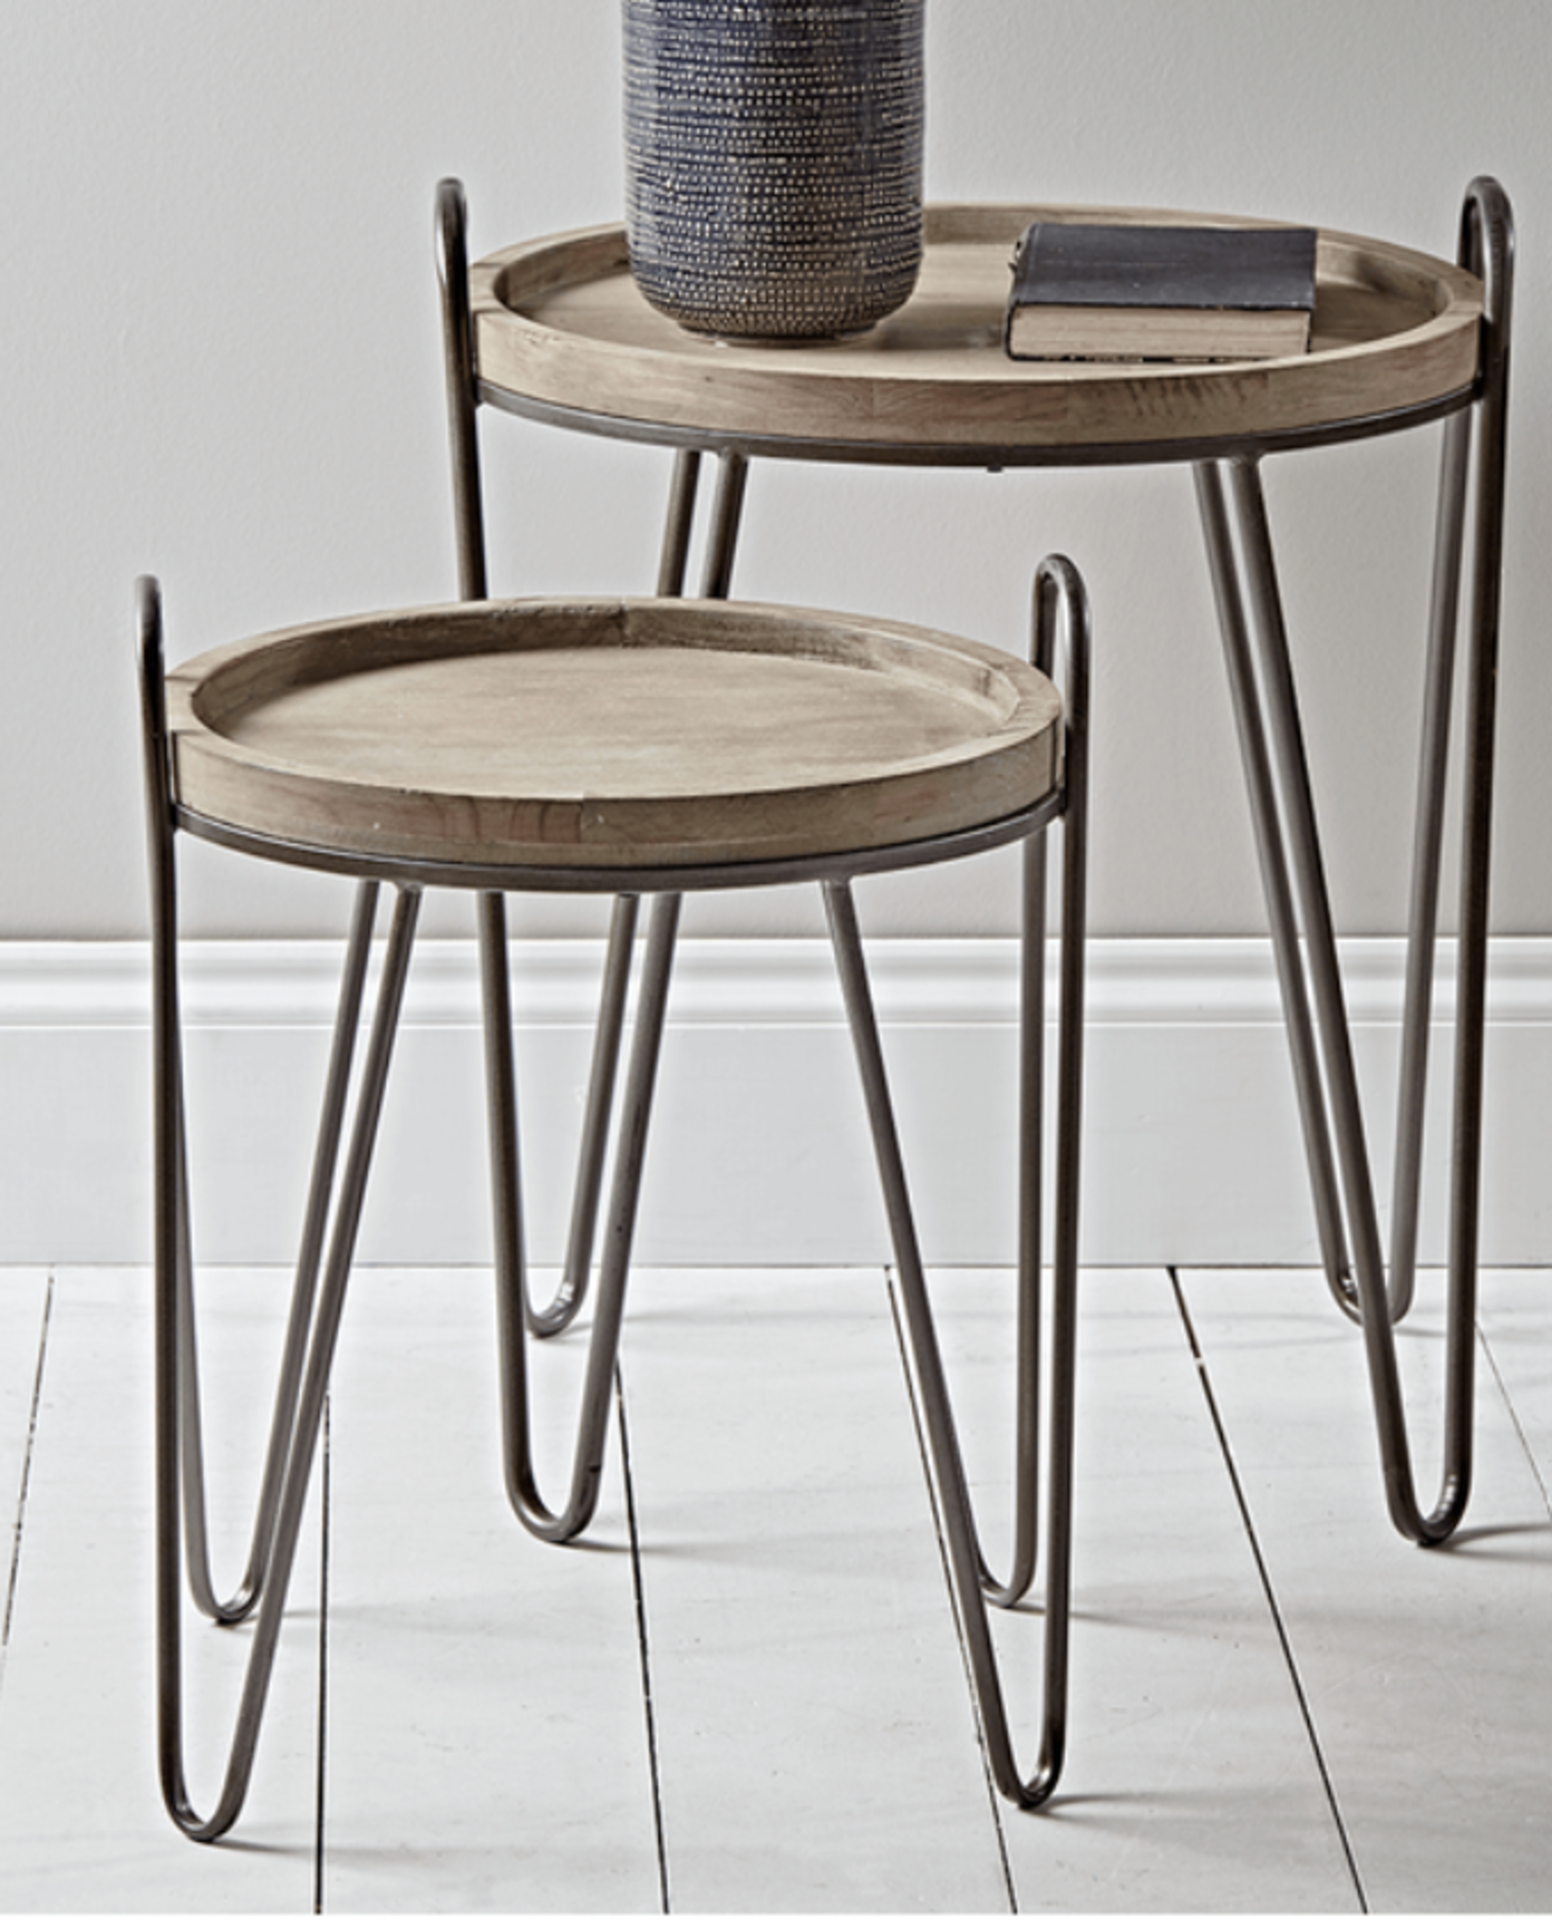 Two Hairpin Nesting Side Tables. RRP £395.00. With round tops made from rustic fir, four legs and